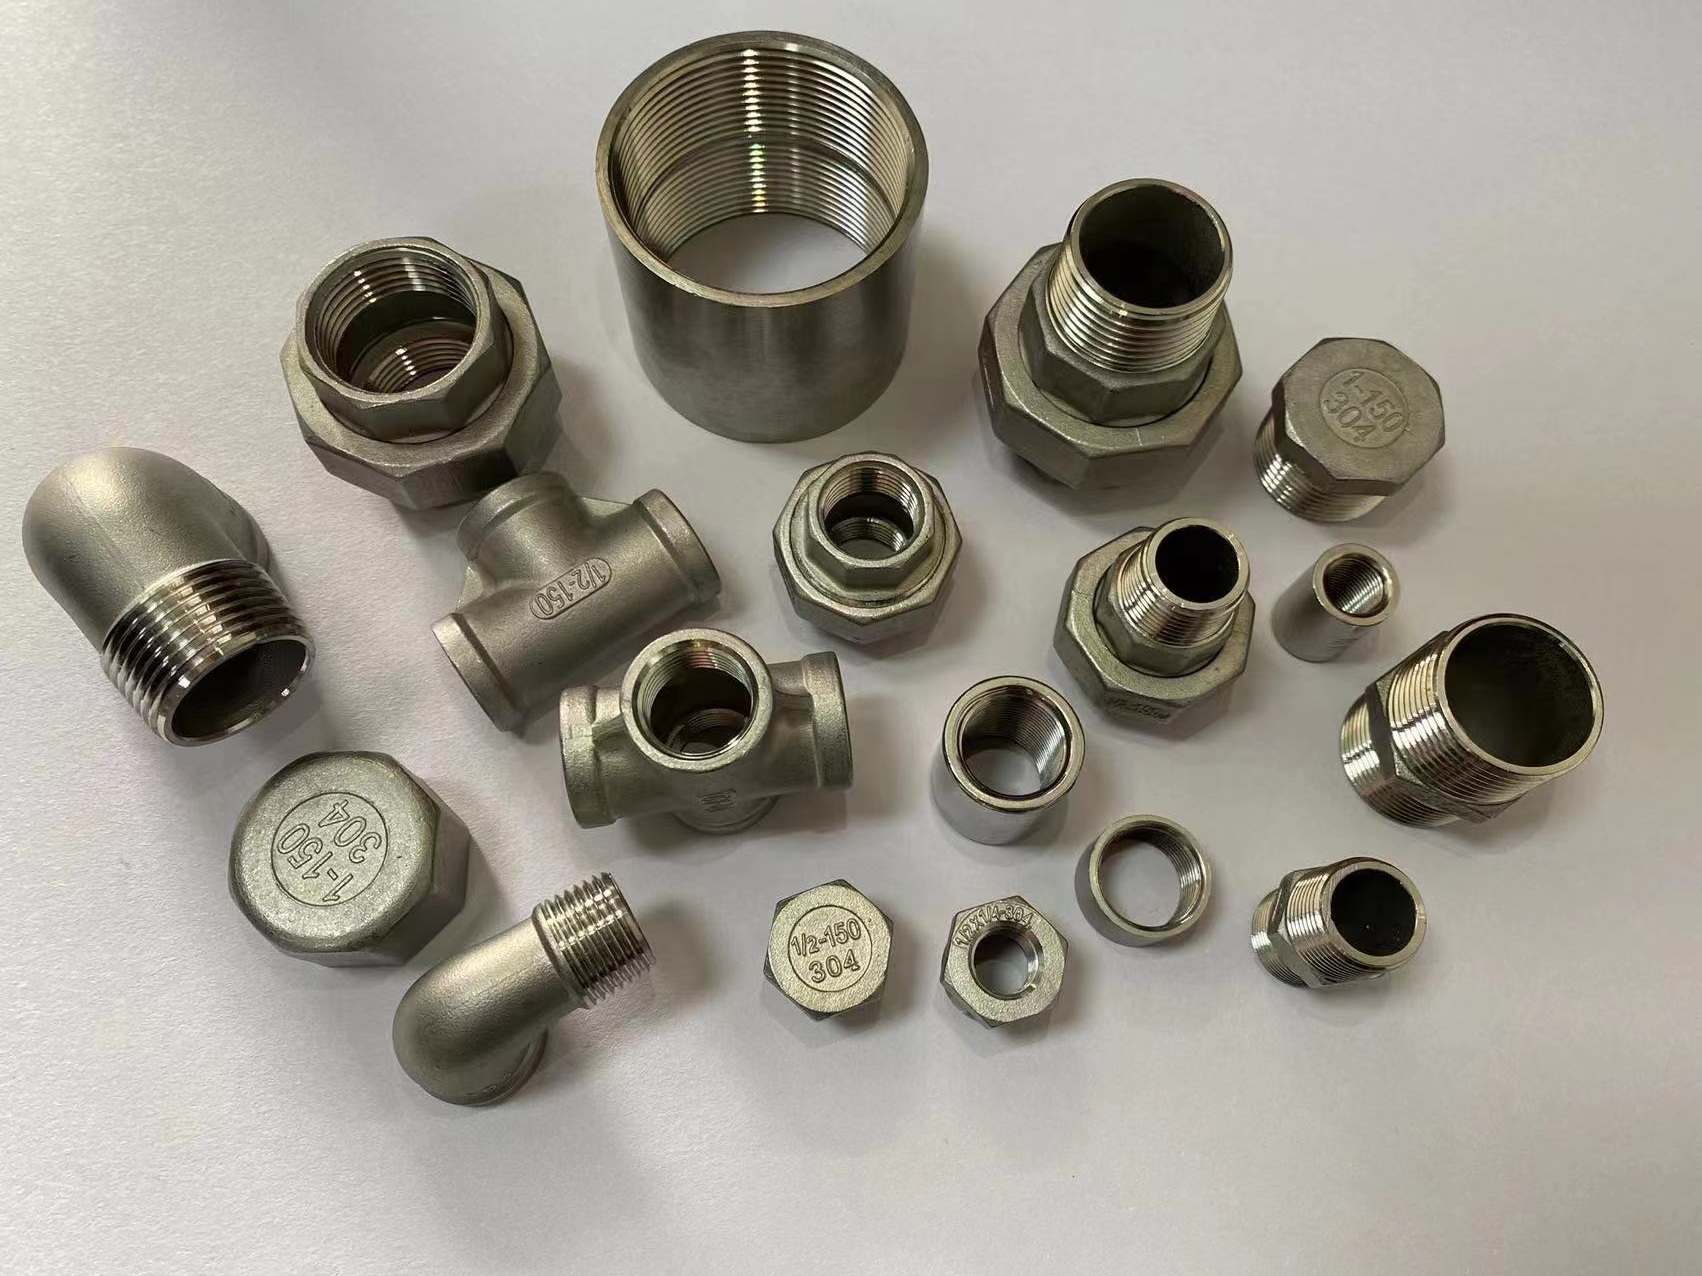 Stainless Steel Pipe Fitting 304 BSPT NPT 2" 90 Degree Threaded Elbow